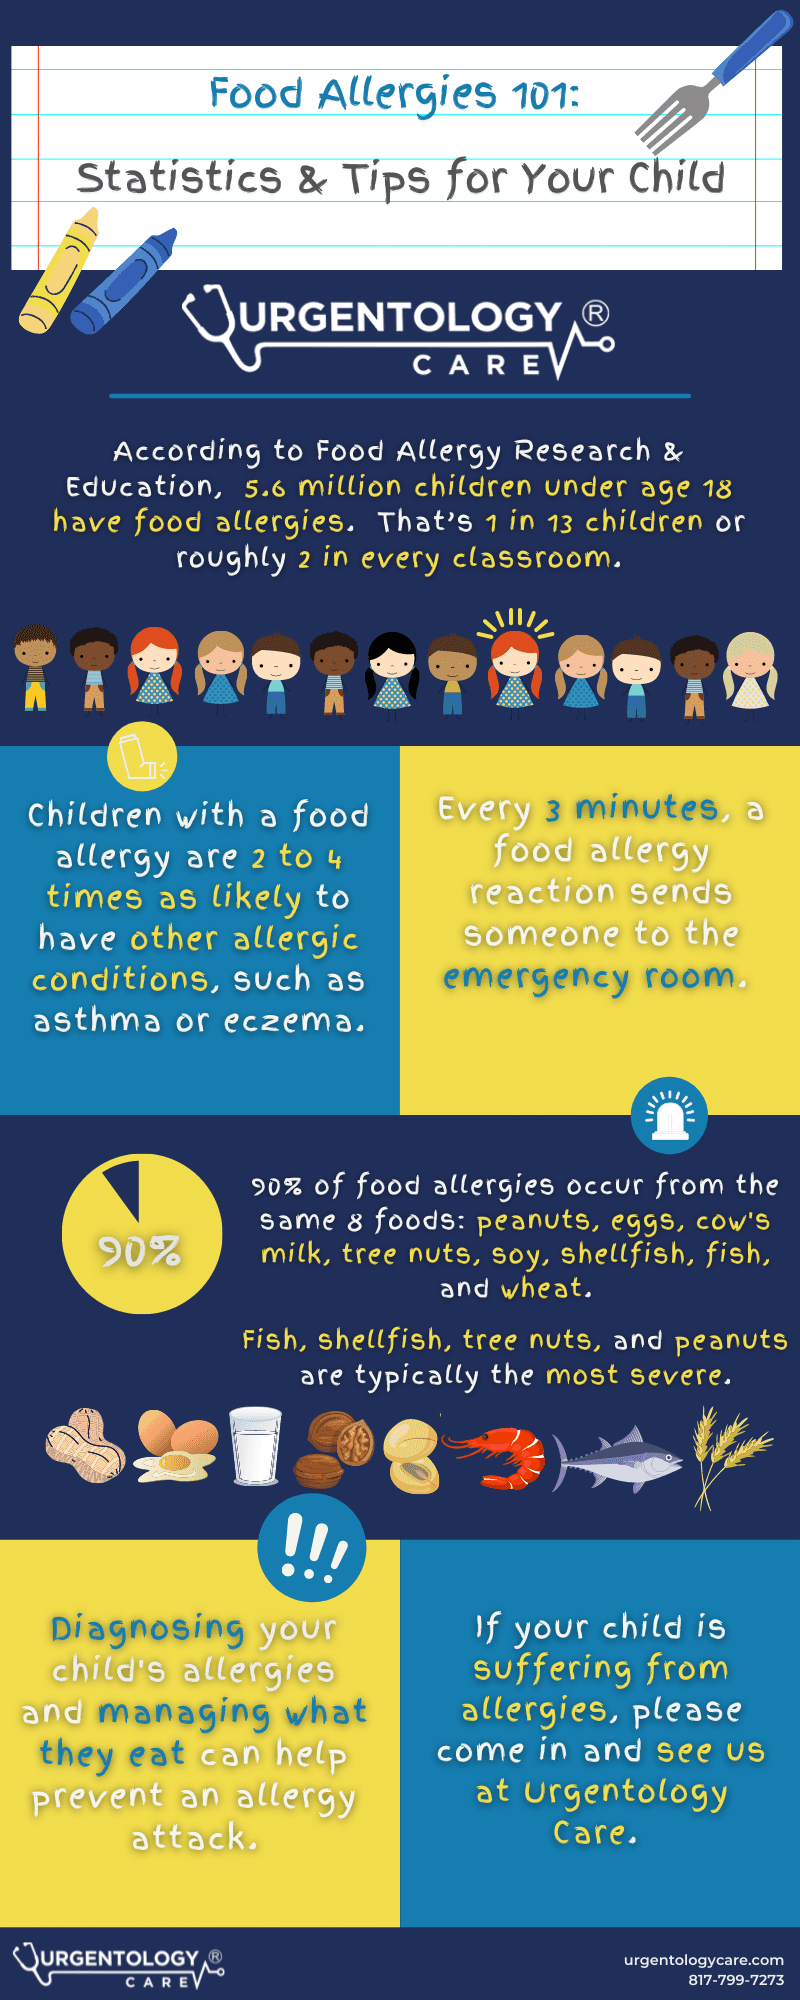 Food Allergies 101 Statistics & Tips for Your Child [Infographic]